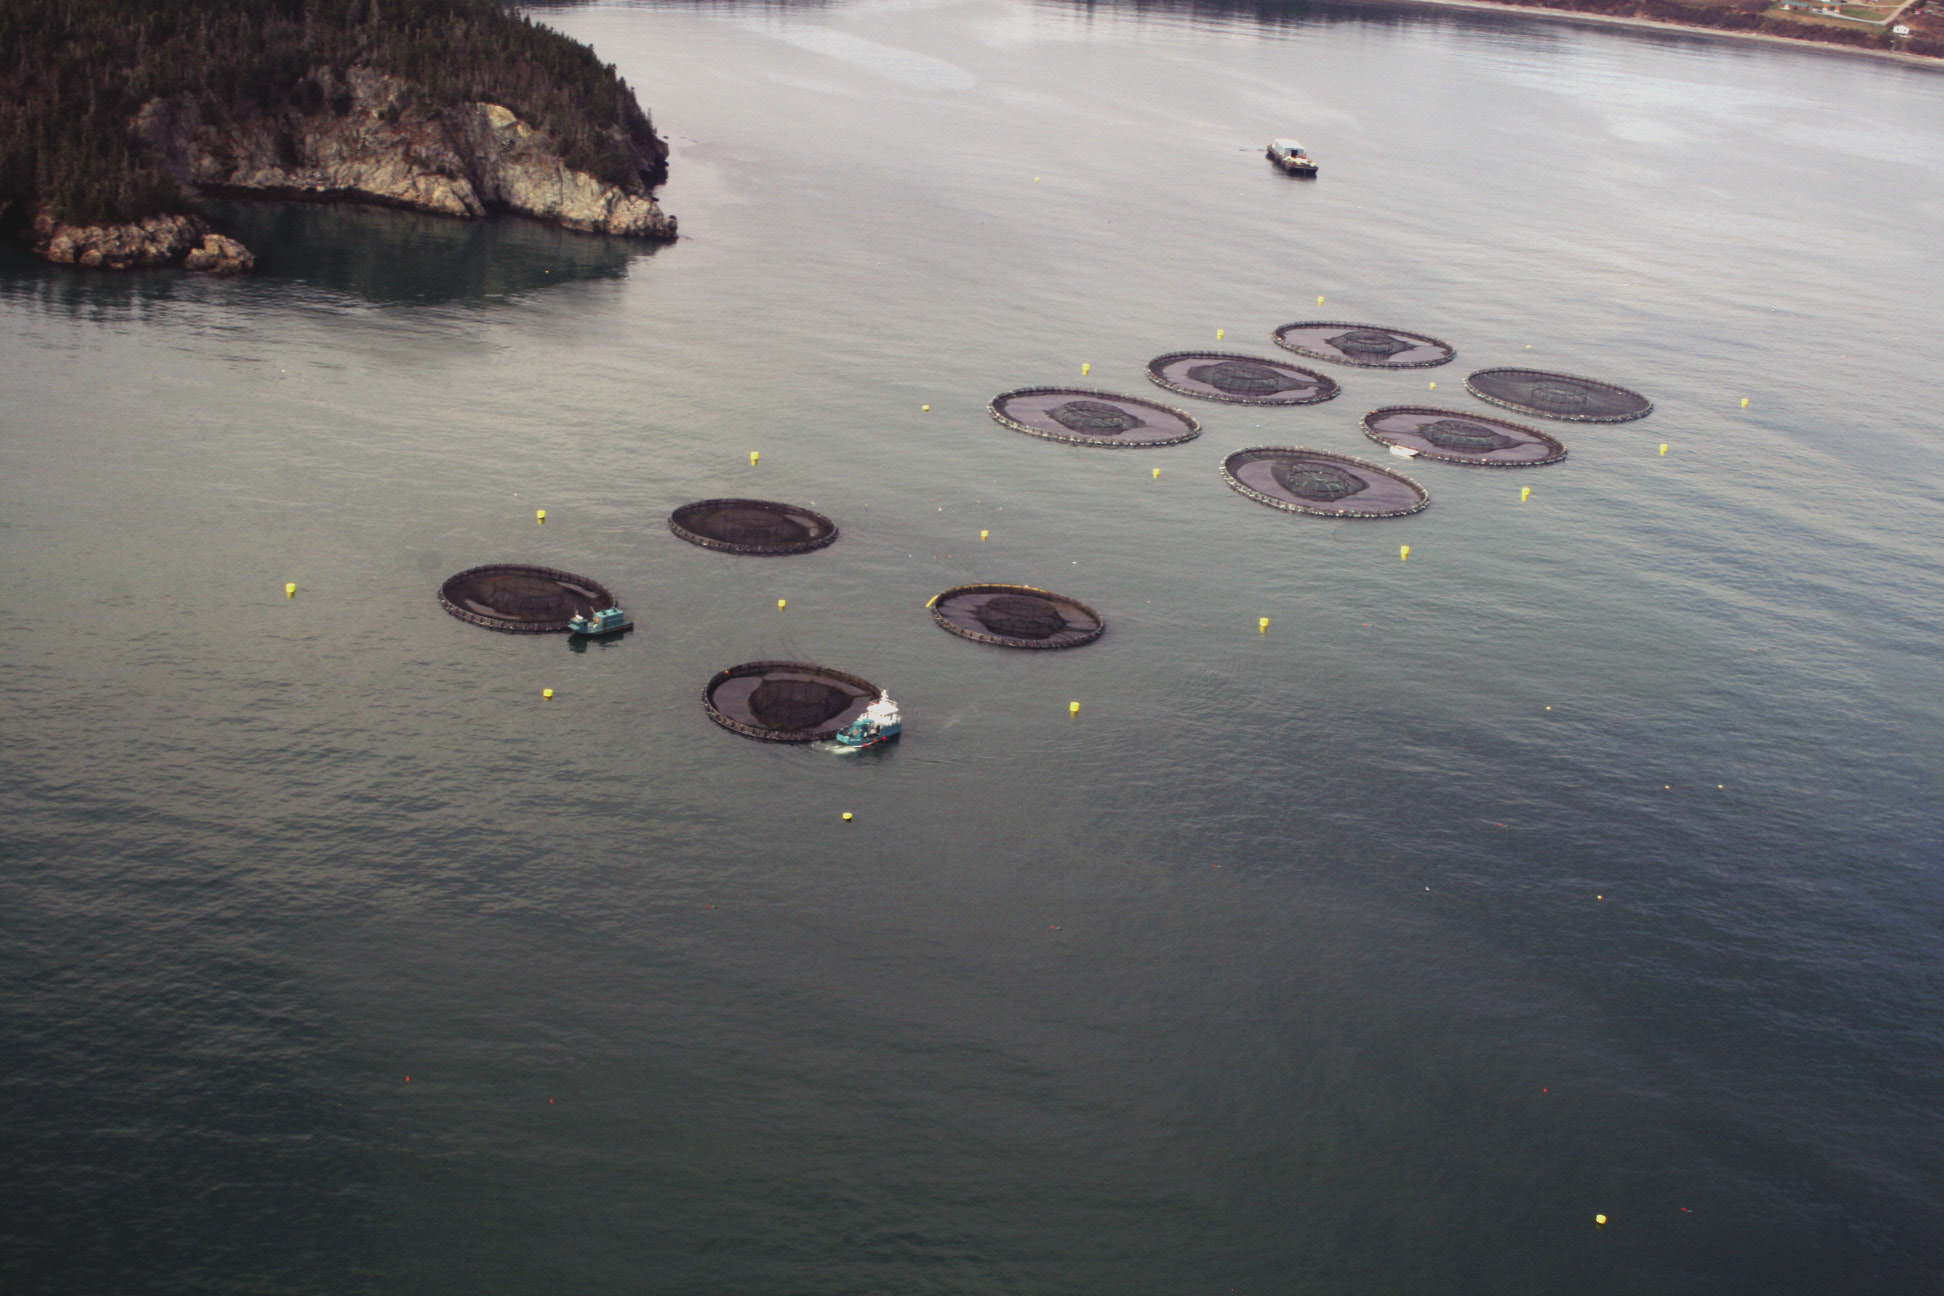 Salmon aquaculture farm in the Bay of Fundy, NB